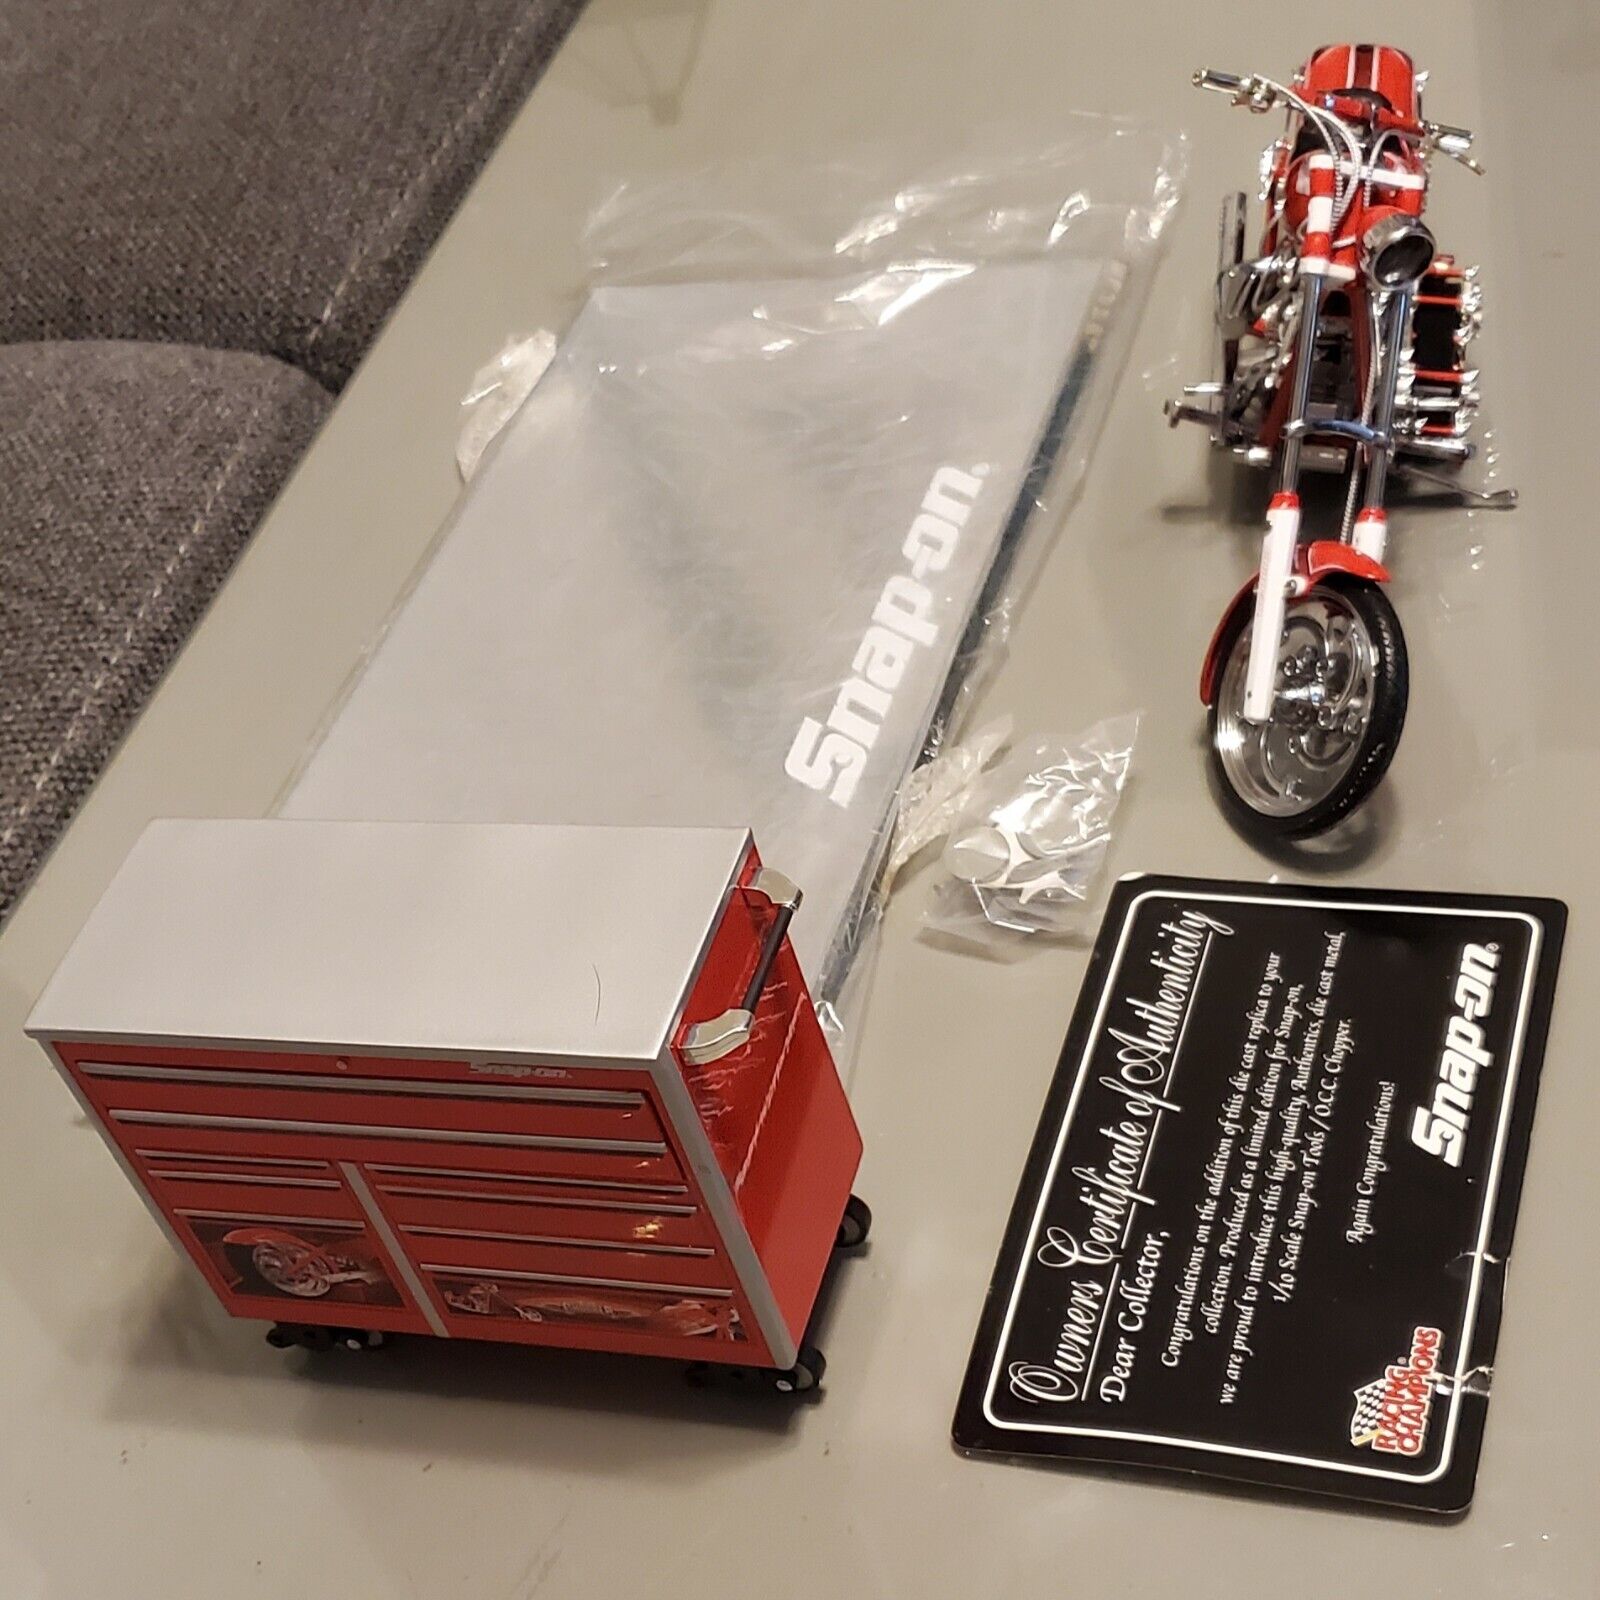 Snap-on The Chopper Motorcycle diecast Orange County Chopper 1:10 In box